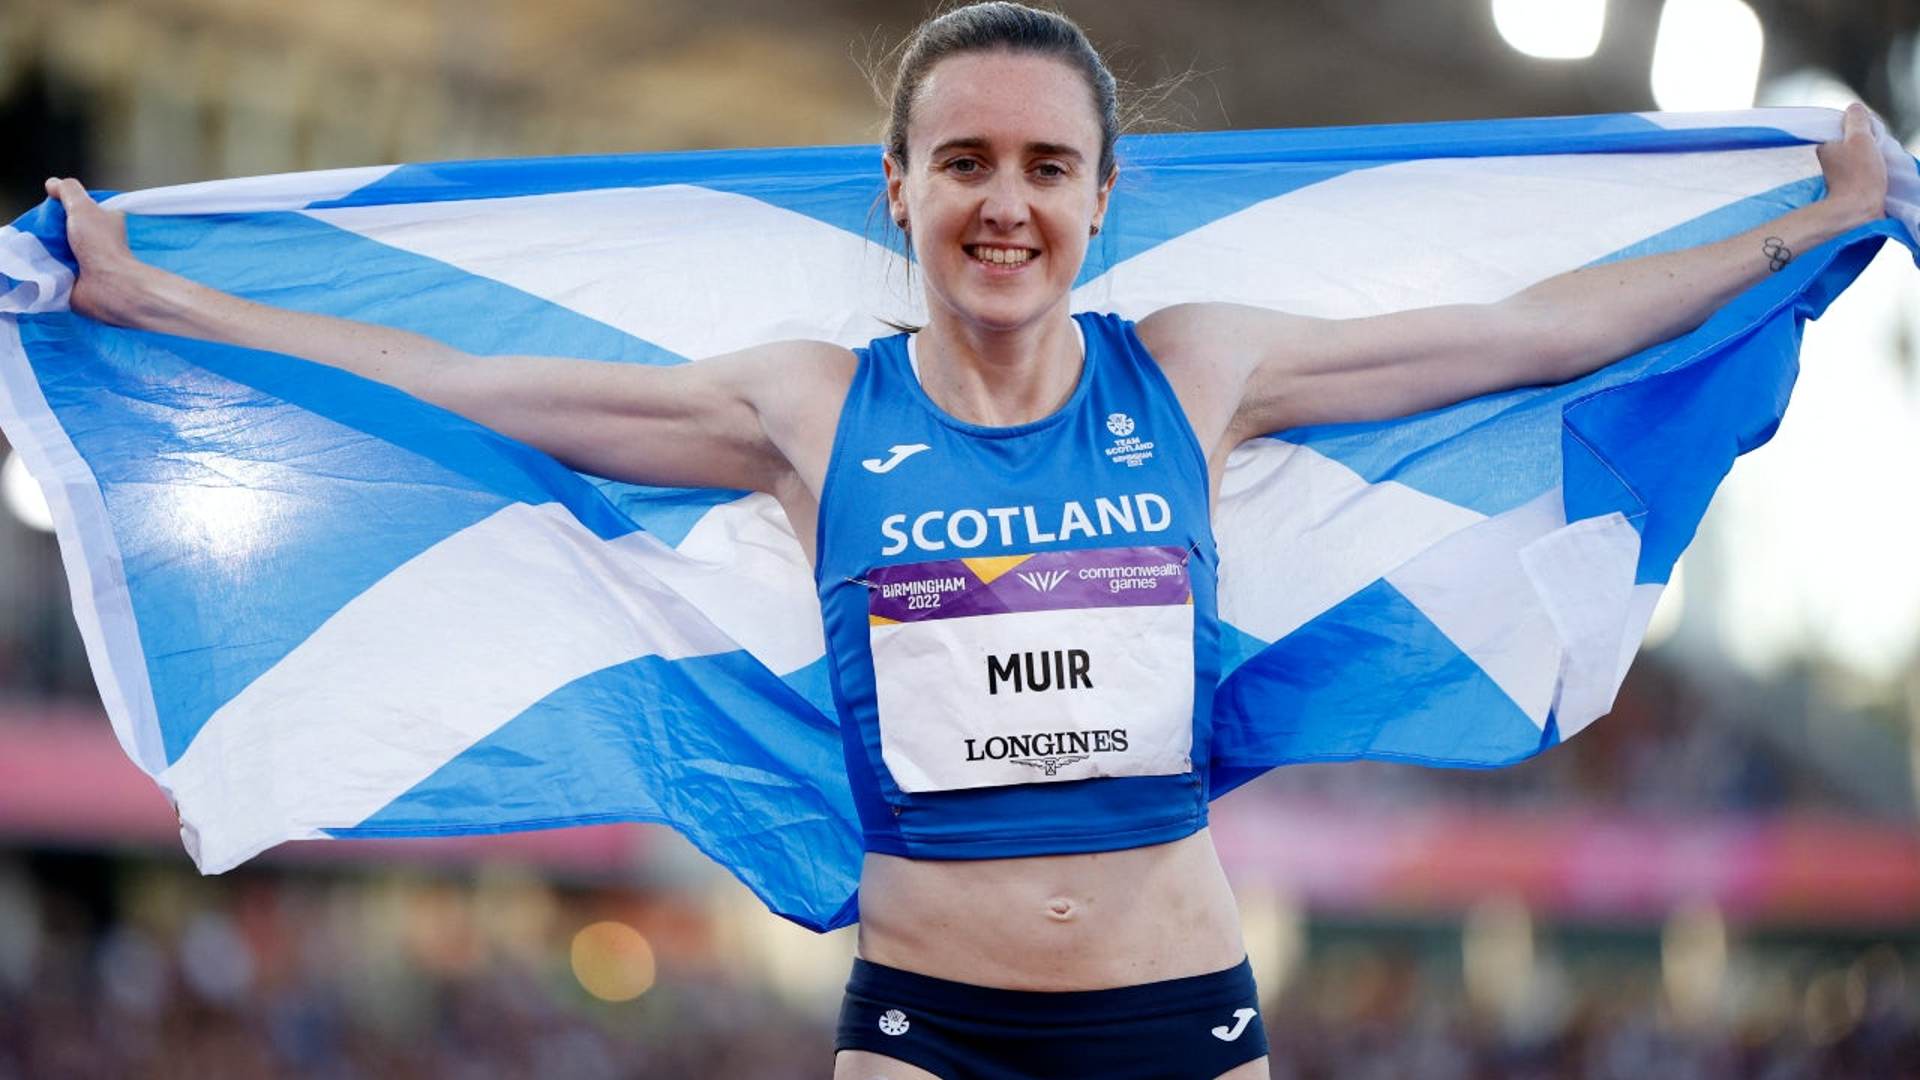 Laura Muir after winning the gold medal at the Commonwealth Games 2022 (Image Credits - Birmingham 2022)